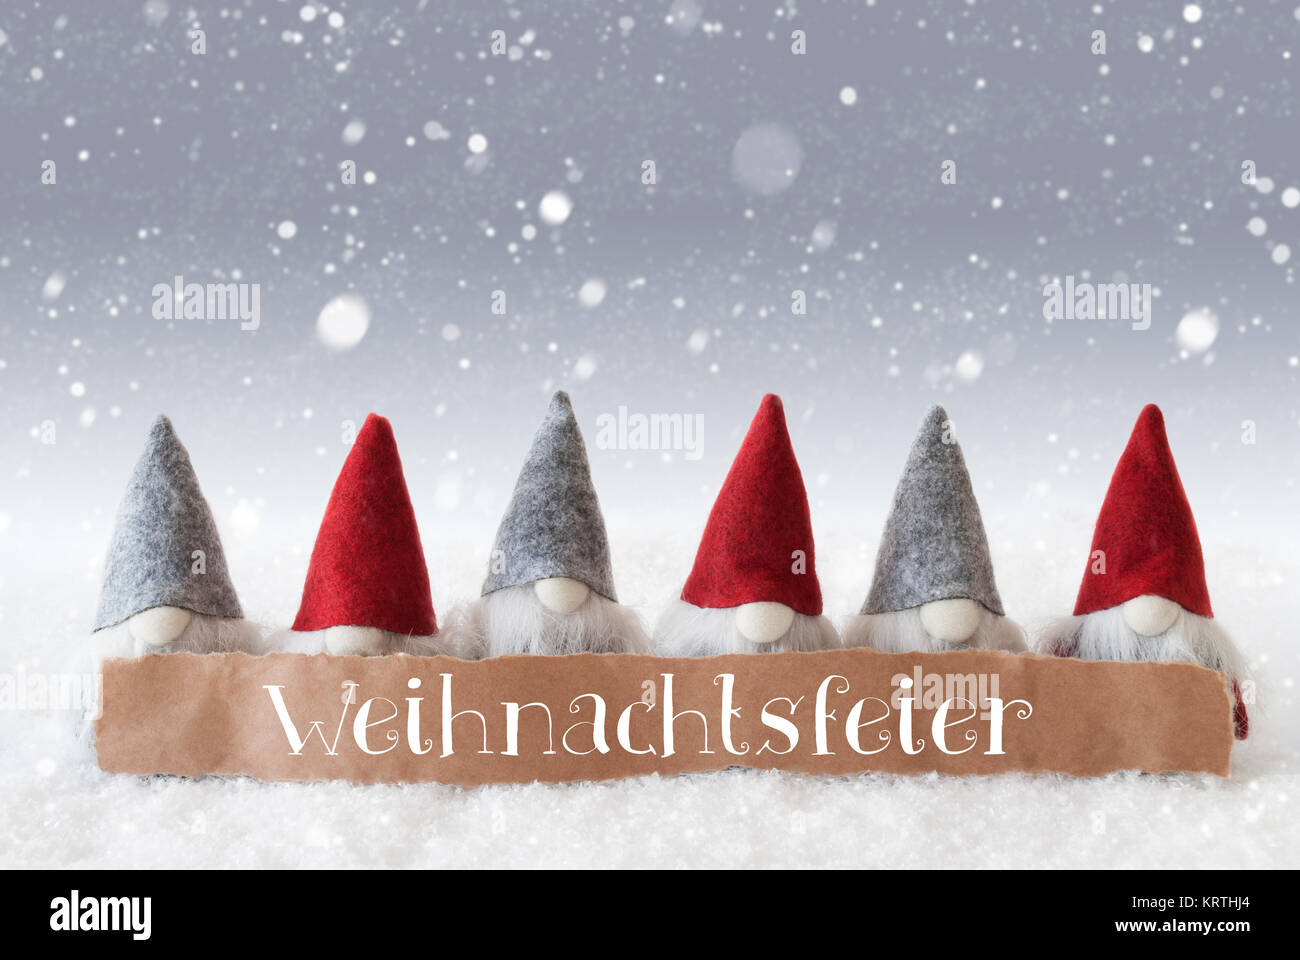 Label With German Text Weihnachtsfeier Means Christmas Party. Christmas Greeting Card With Gnomes. Silver Background With Snow And Snowflakes Stock Photo